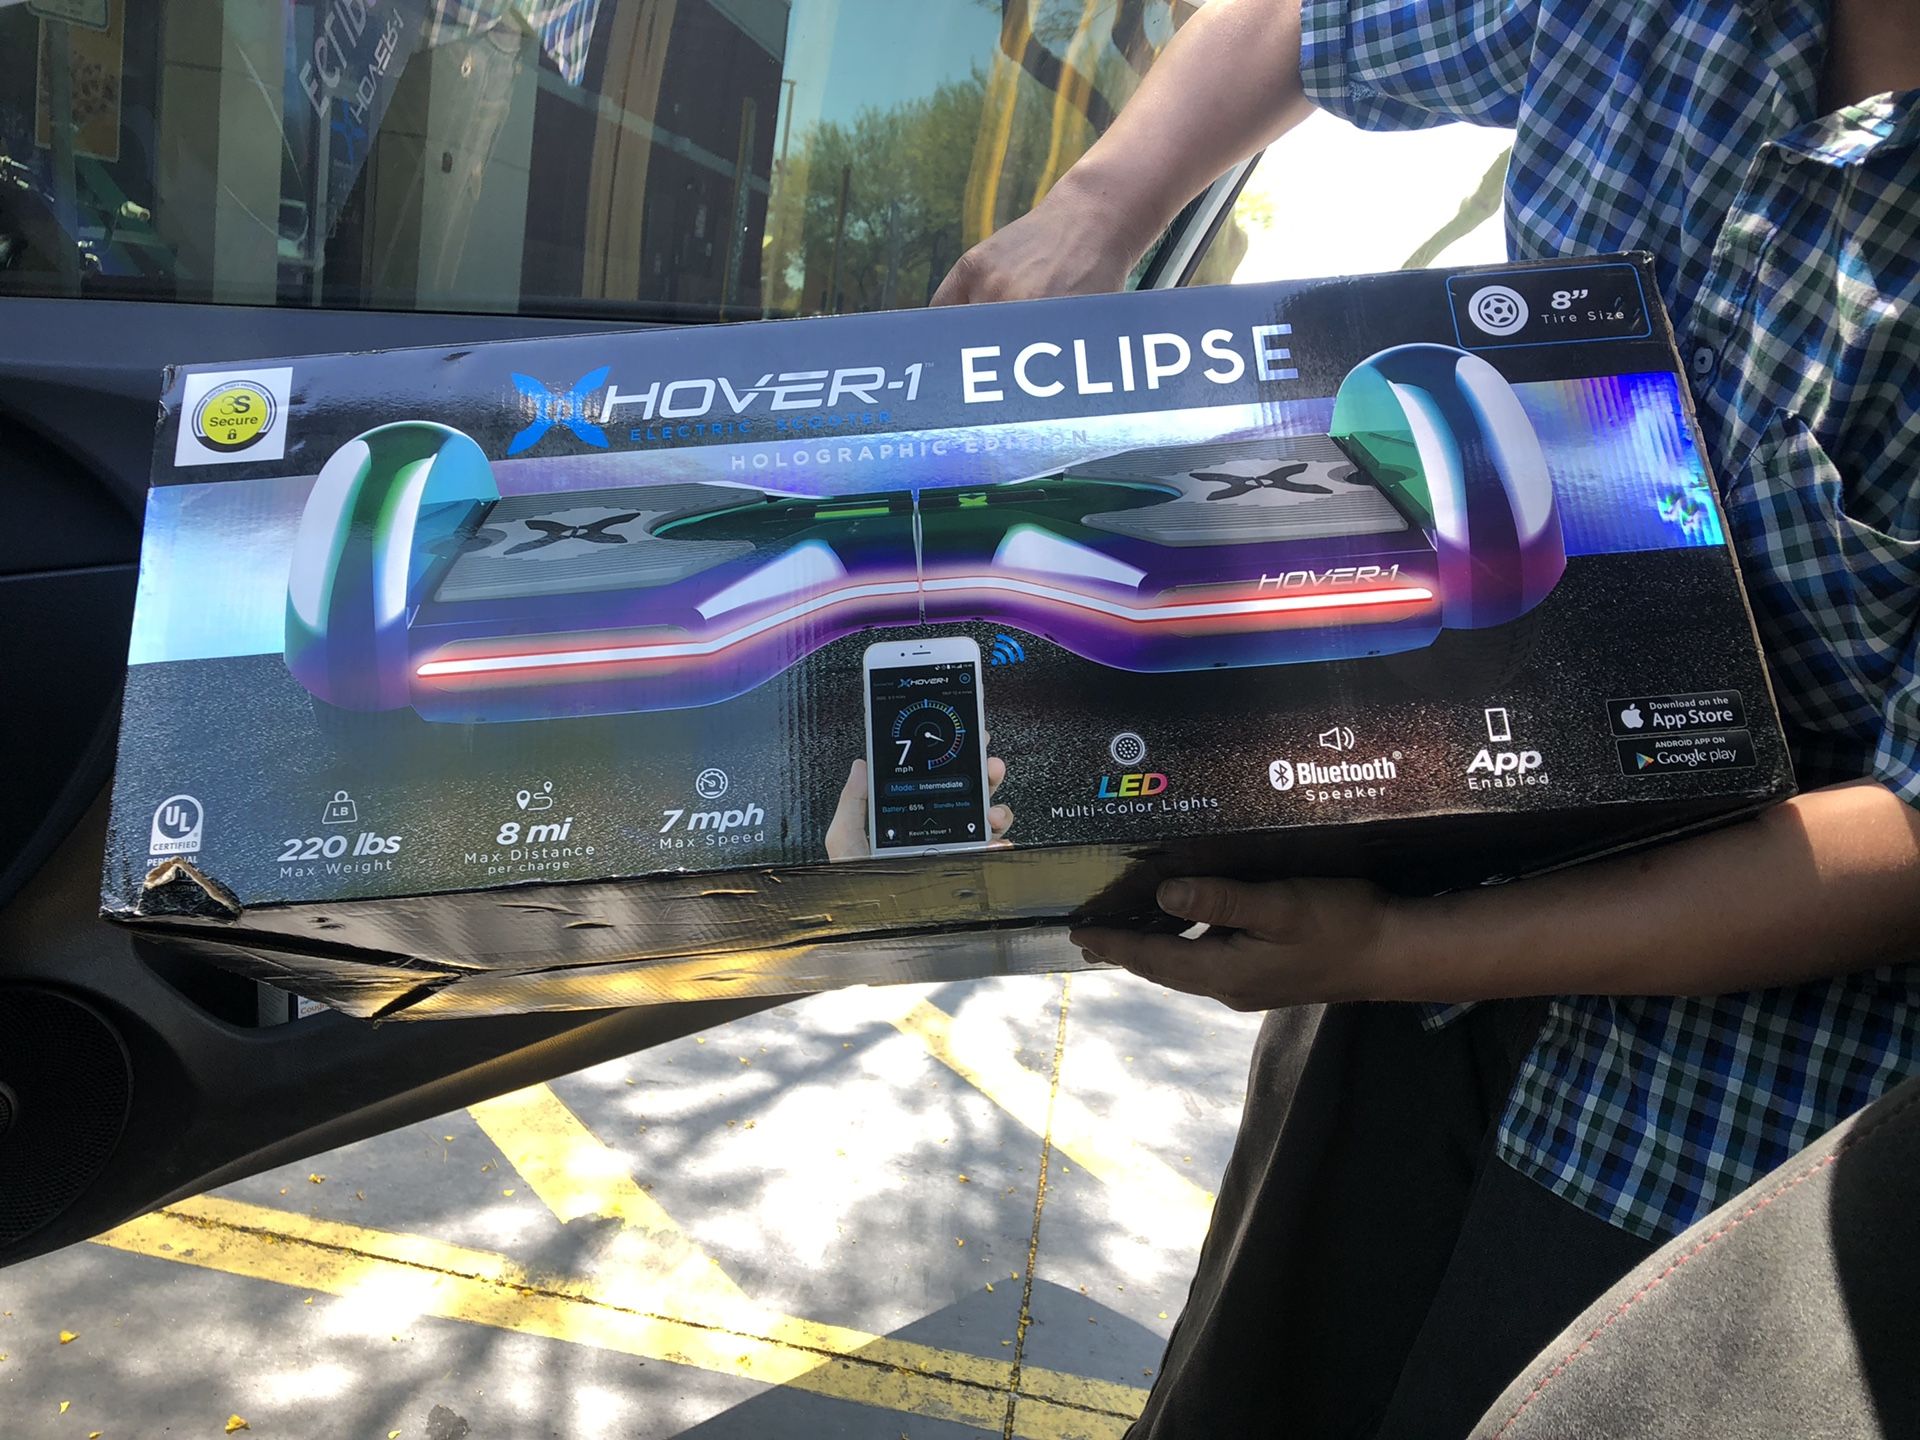 HoverBoard X-Hover1 Eclipse